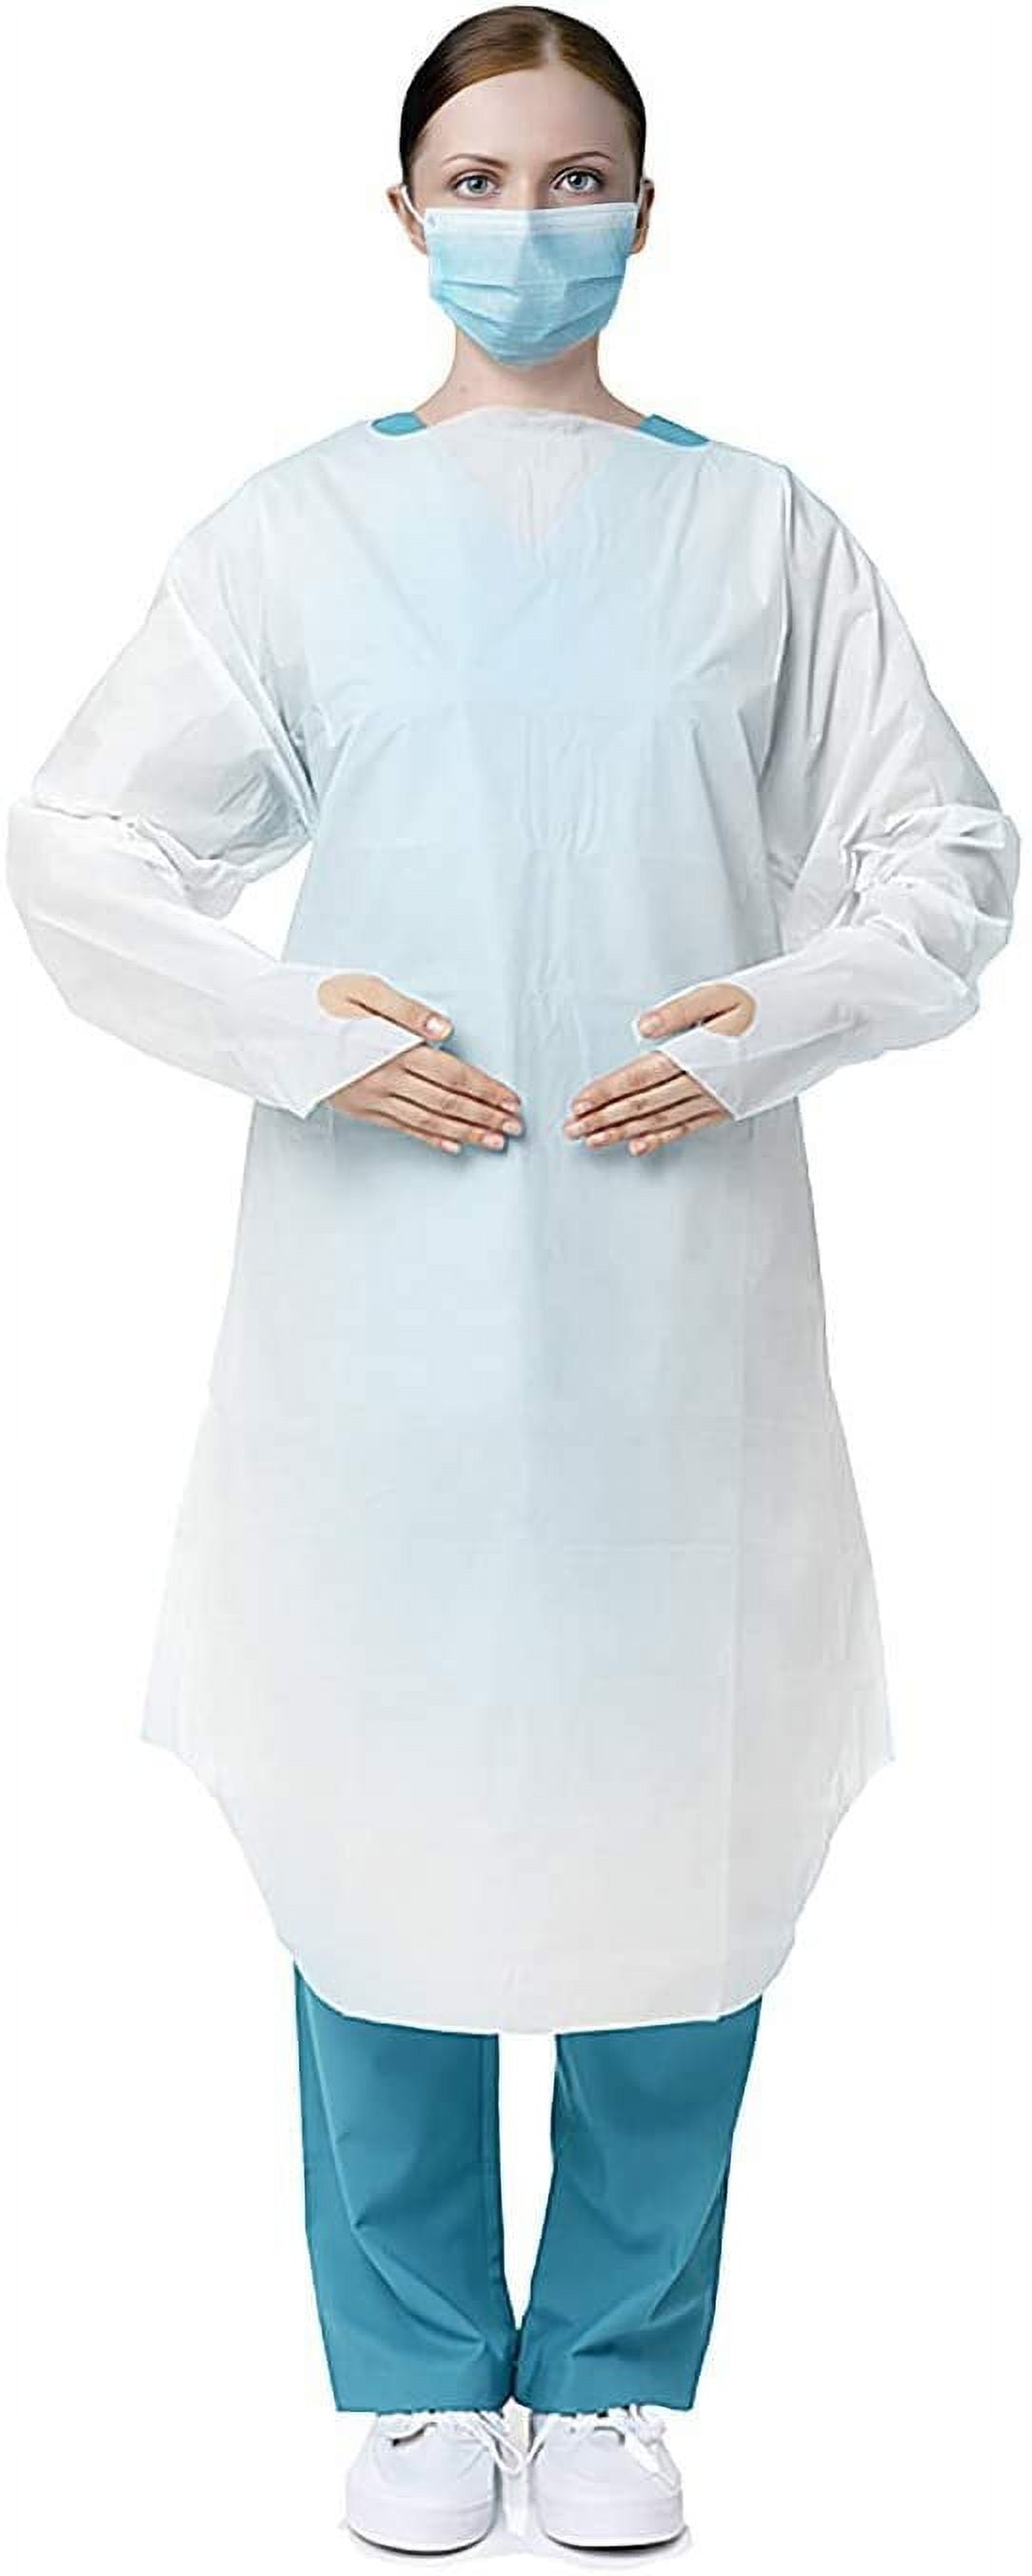 Hospital Suit Waterproof 45g SMS Isolation Gown Rid Cuff Disposable  Surgical Gown